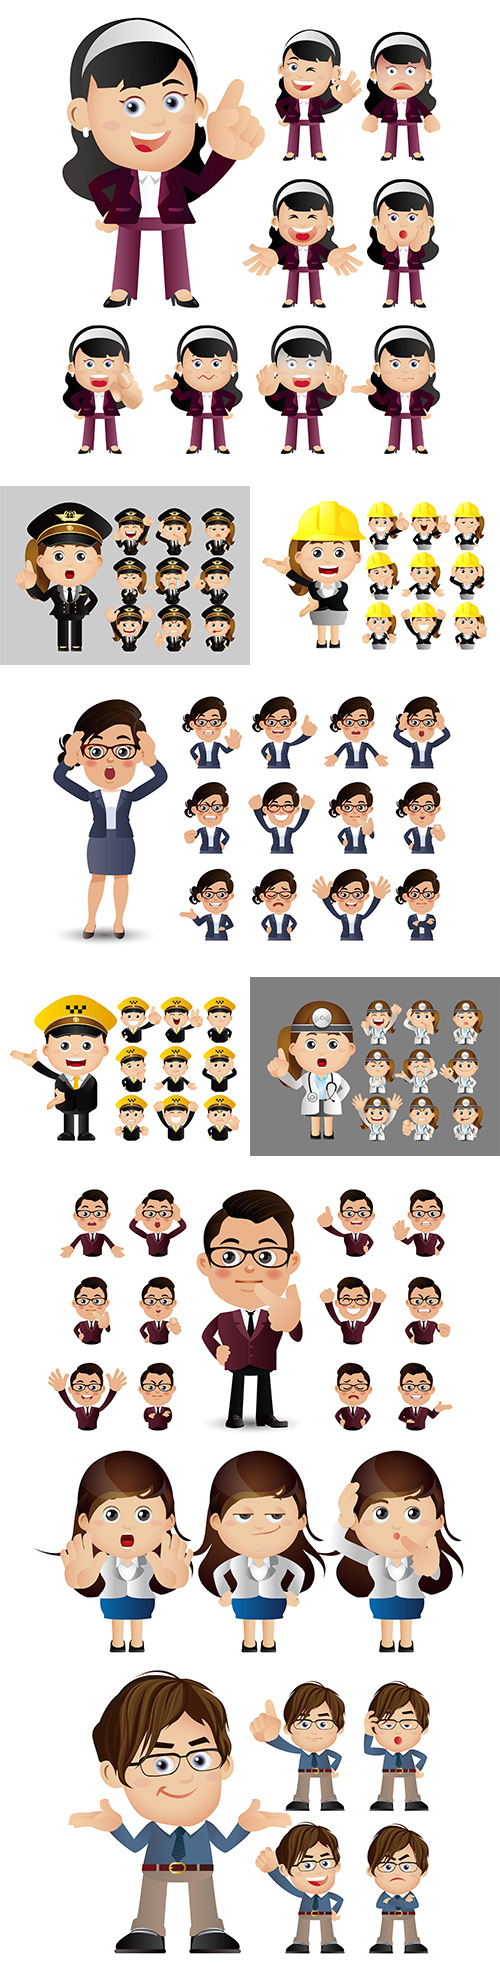 Expressions of business people with different persons and professions
